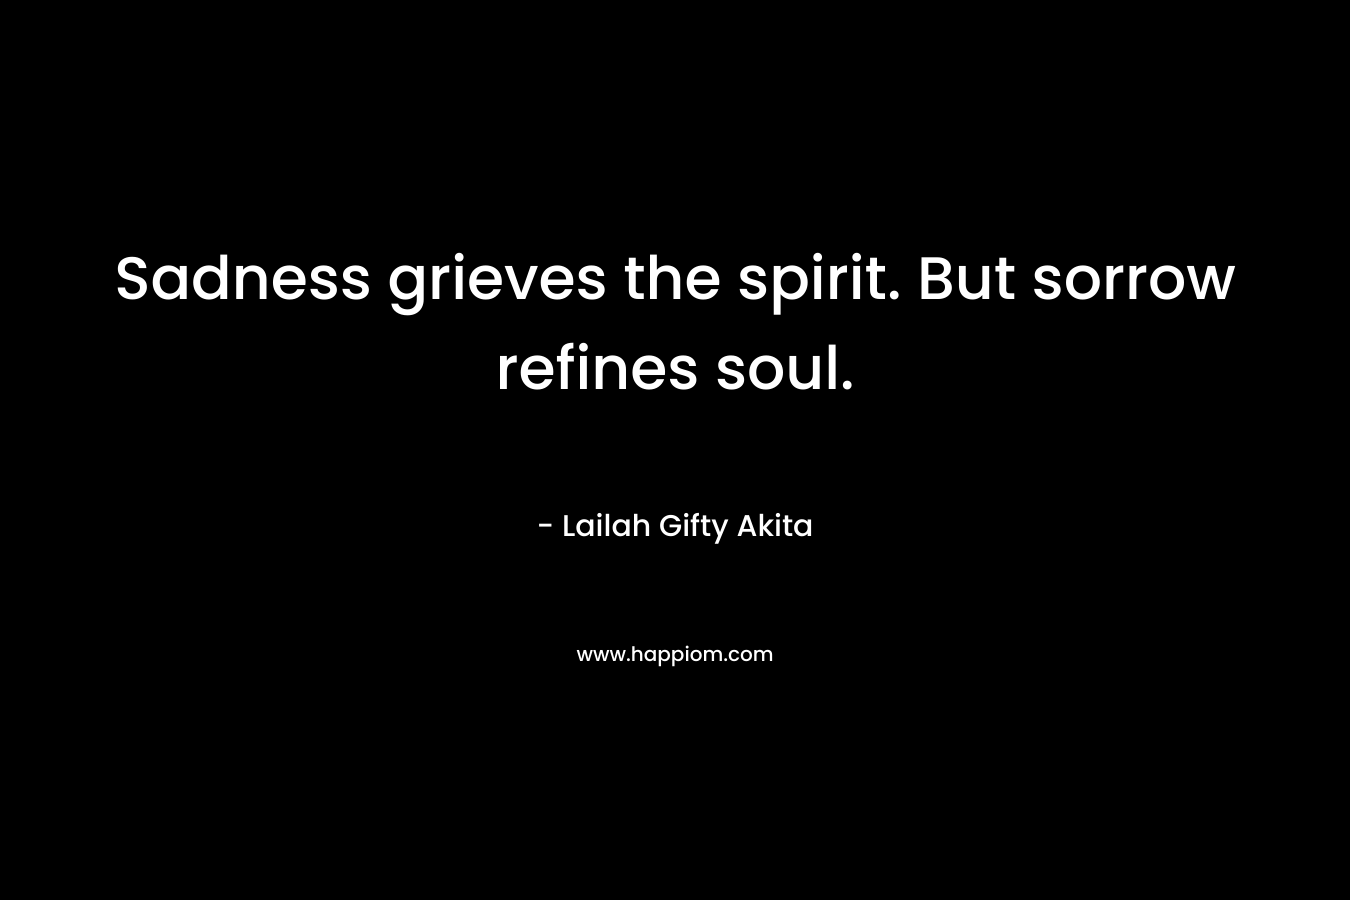 Sadness grieves the spirit. But sorrow refines soul.